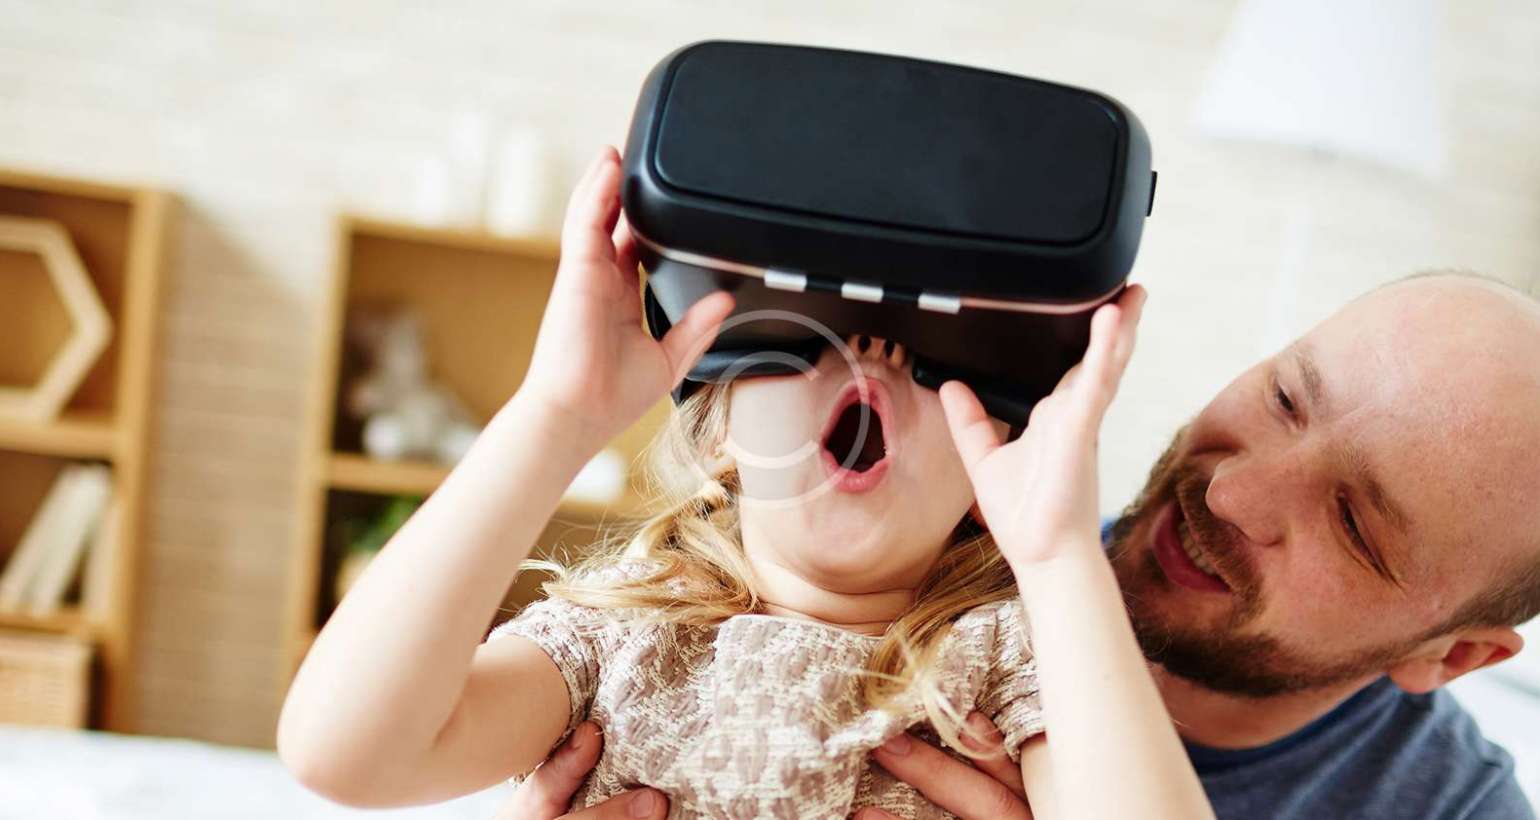 Trend Update: Top Virtual Reality Innovations and Trends